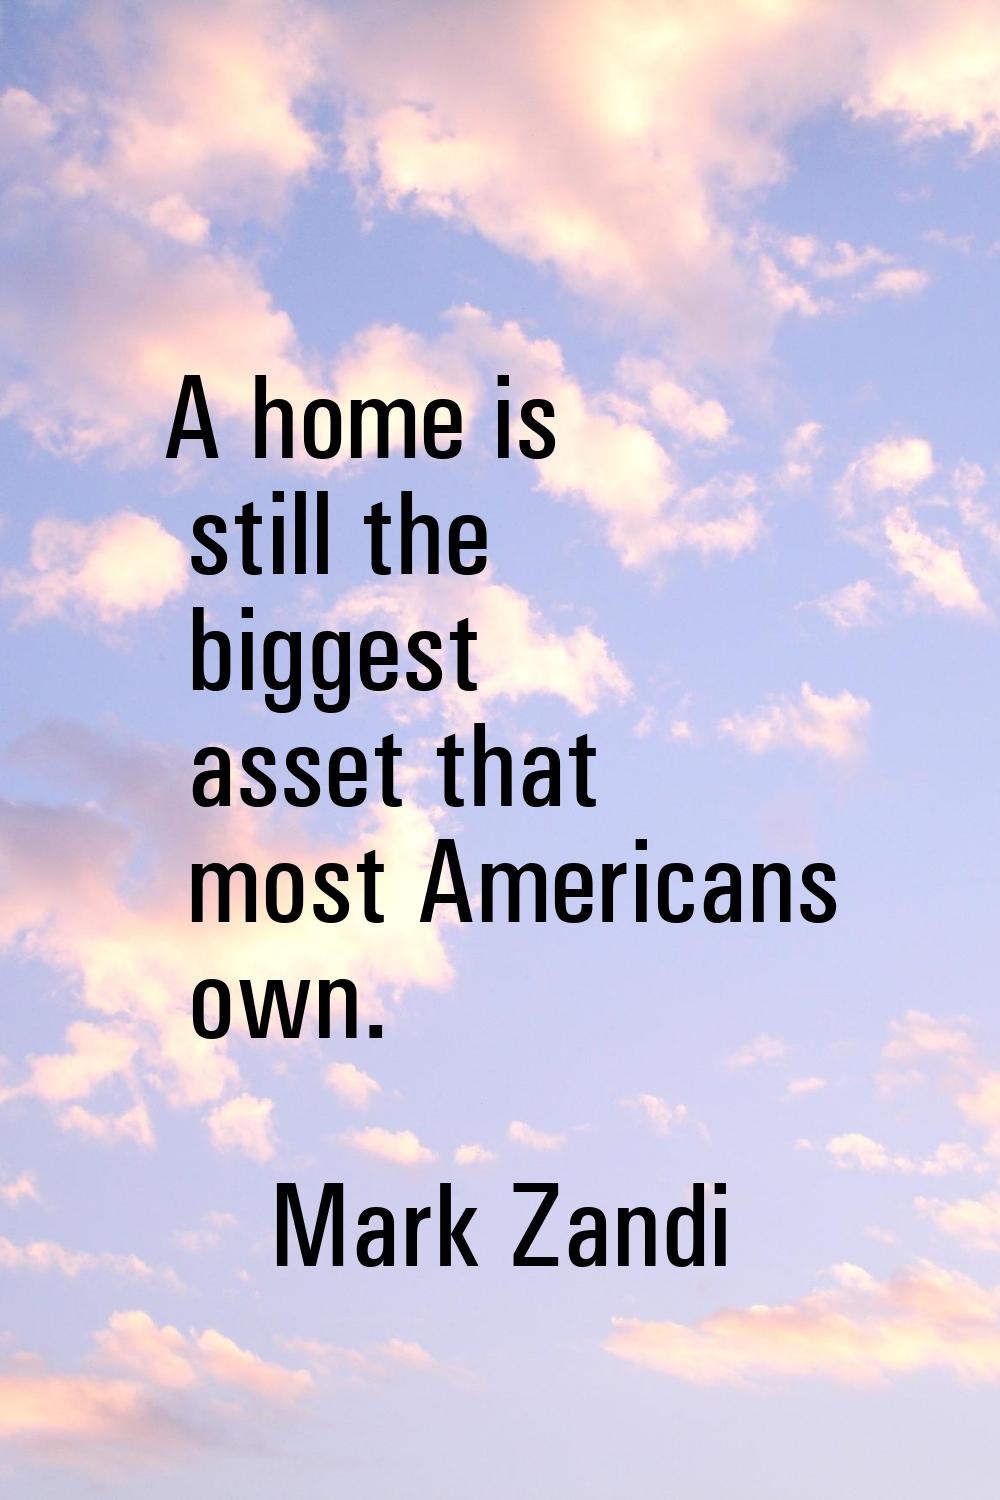 A home is still the biggest asset that most Americans own.